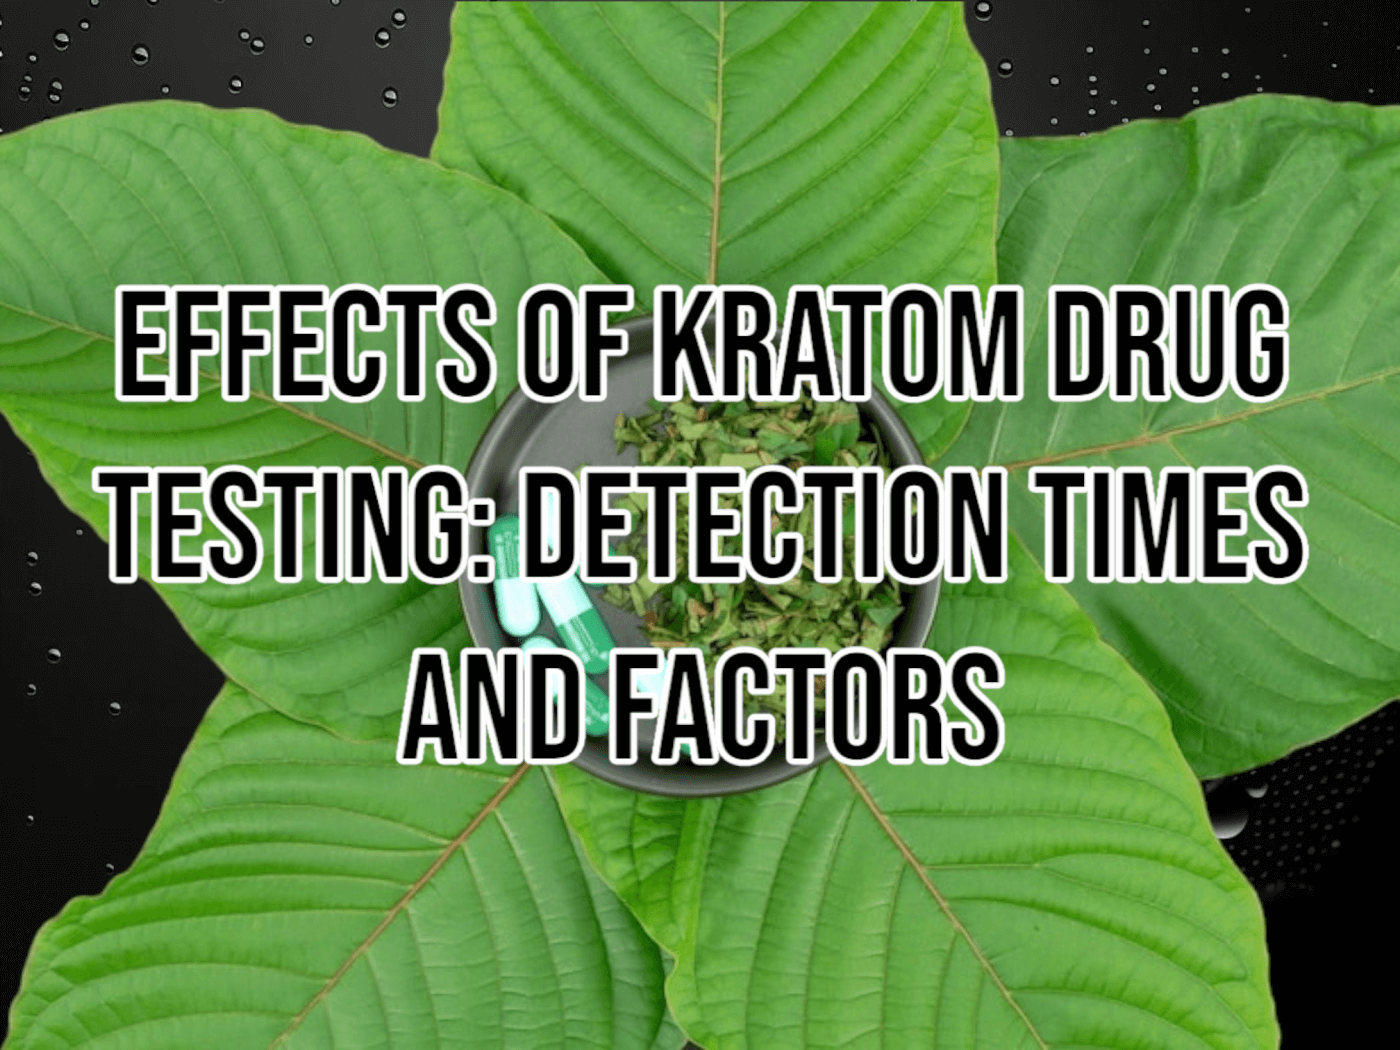 Effects of Kratom Drug Testing: Detection Times and Factors